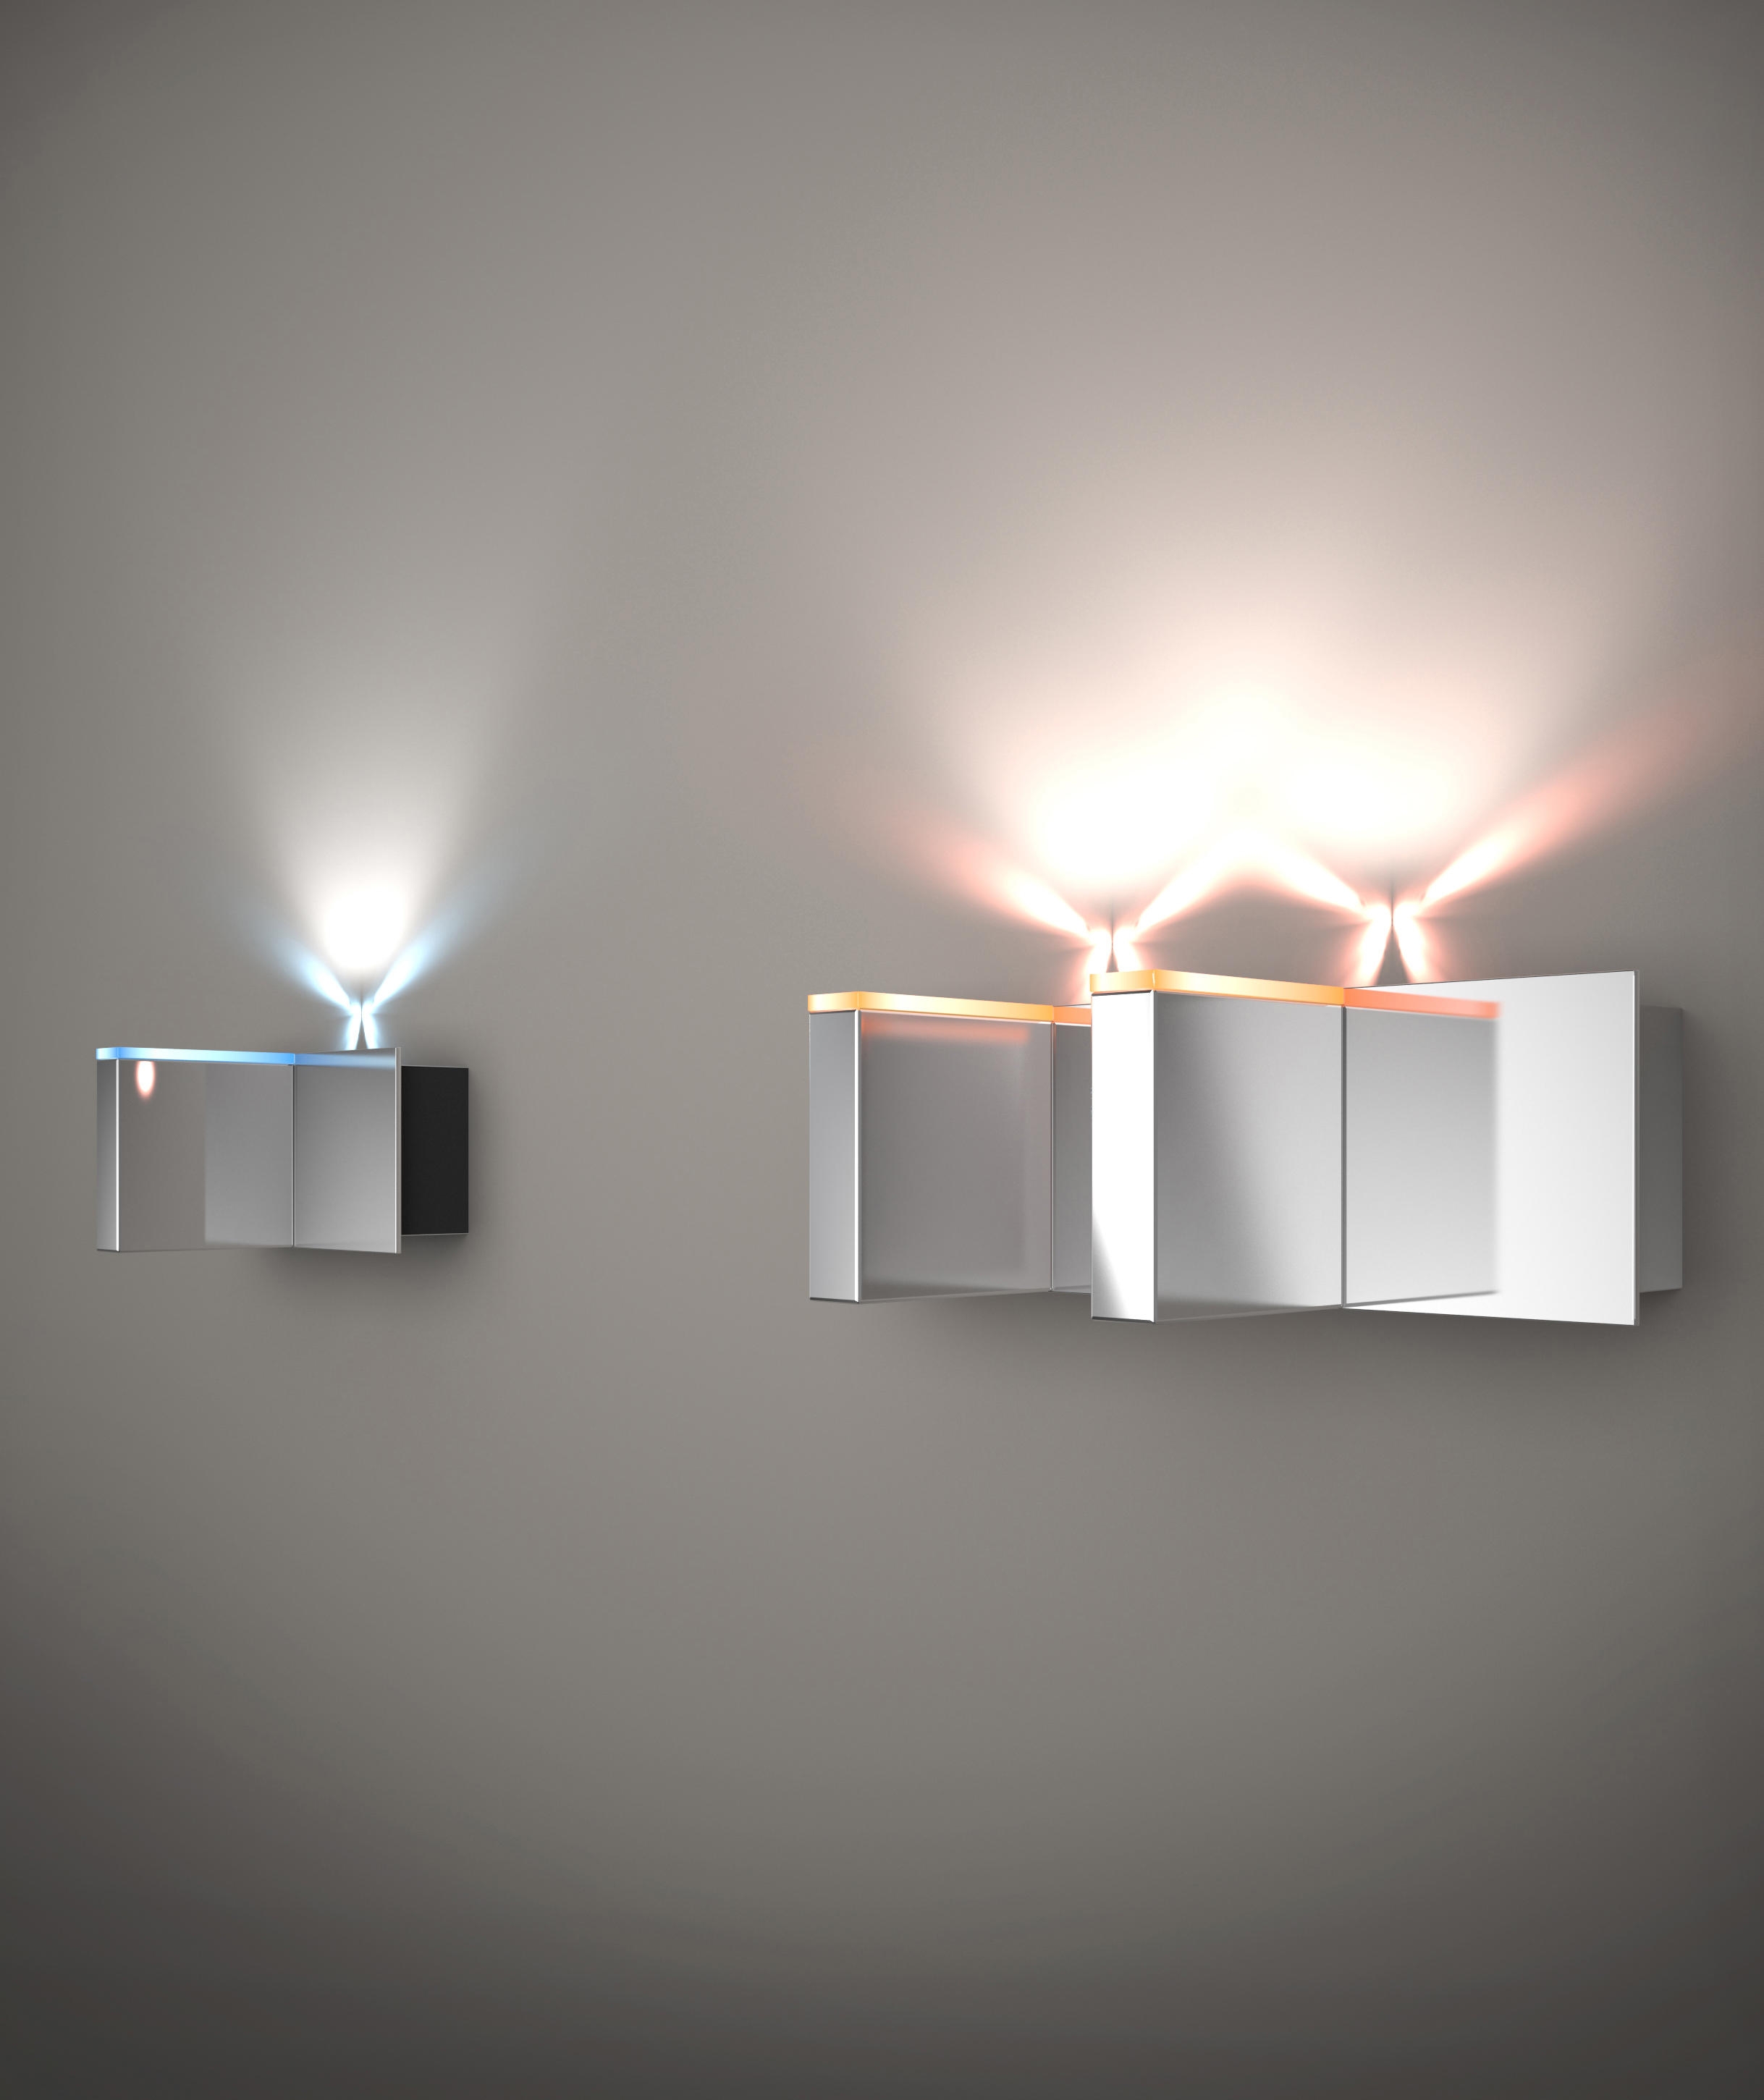 Chrome Ceiling Lights With Matching Wall Lights2437 X 2902